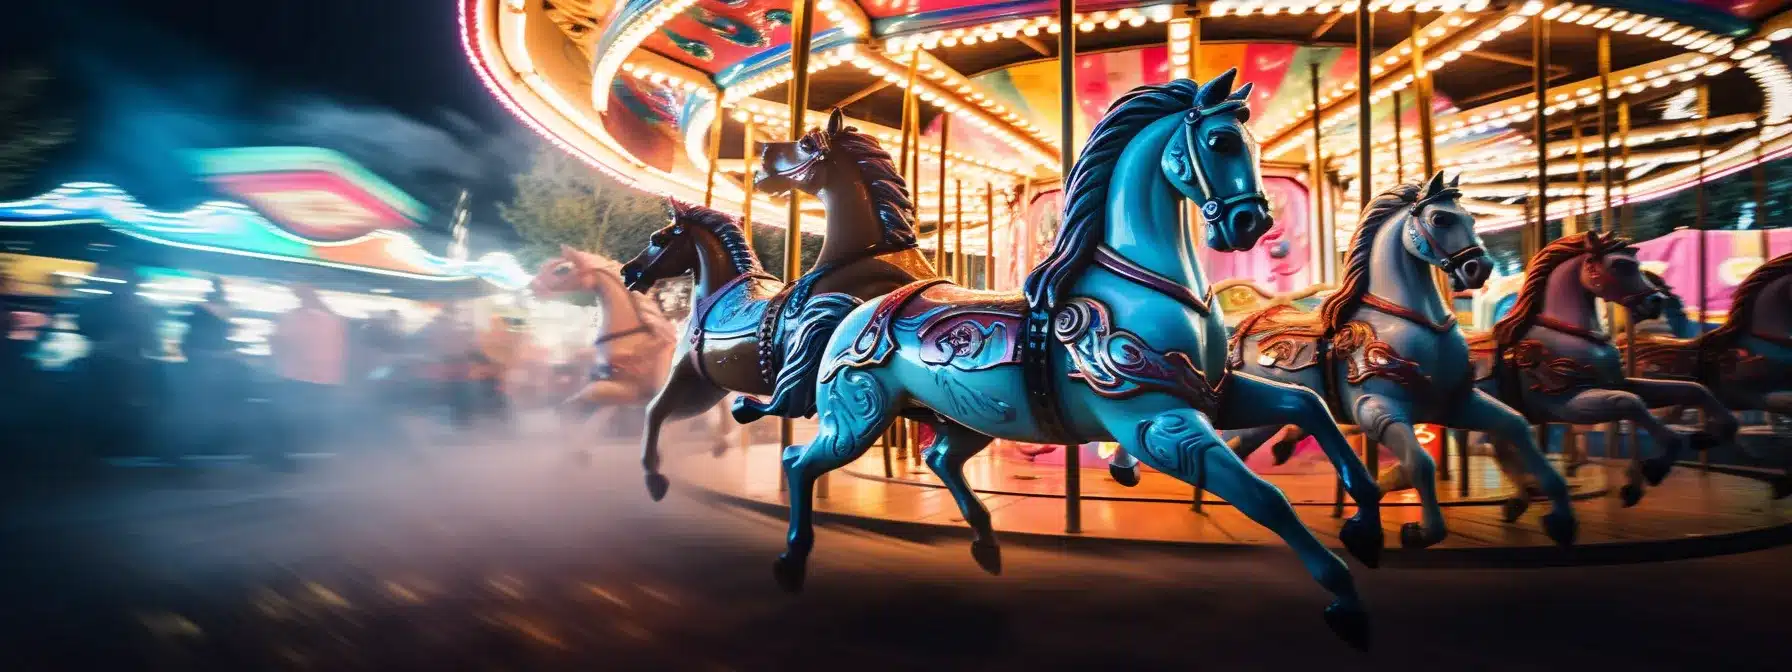 A Colorful Carousel With Flashing Lights And Vibrant Horses, Attracting A Crowd Of Eager Spectators.